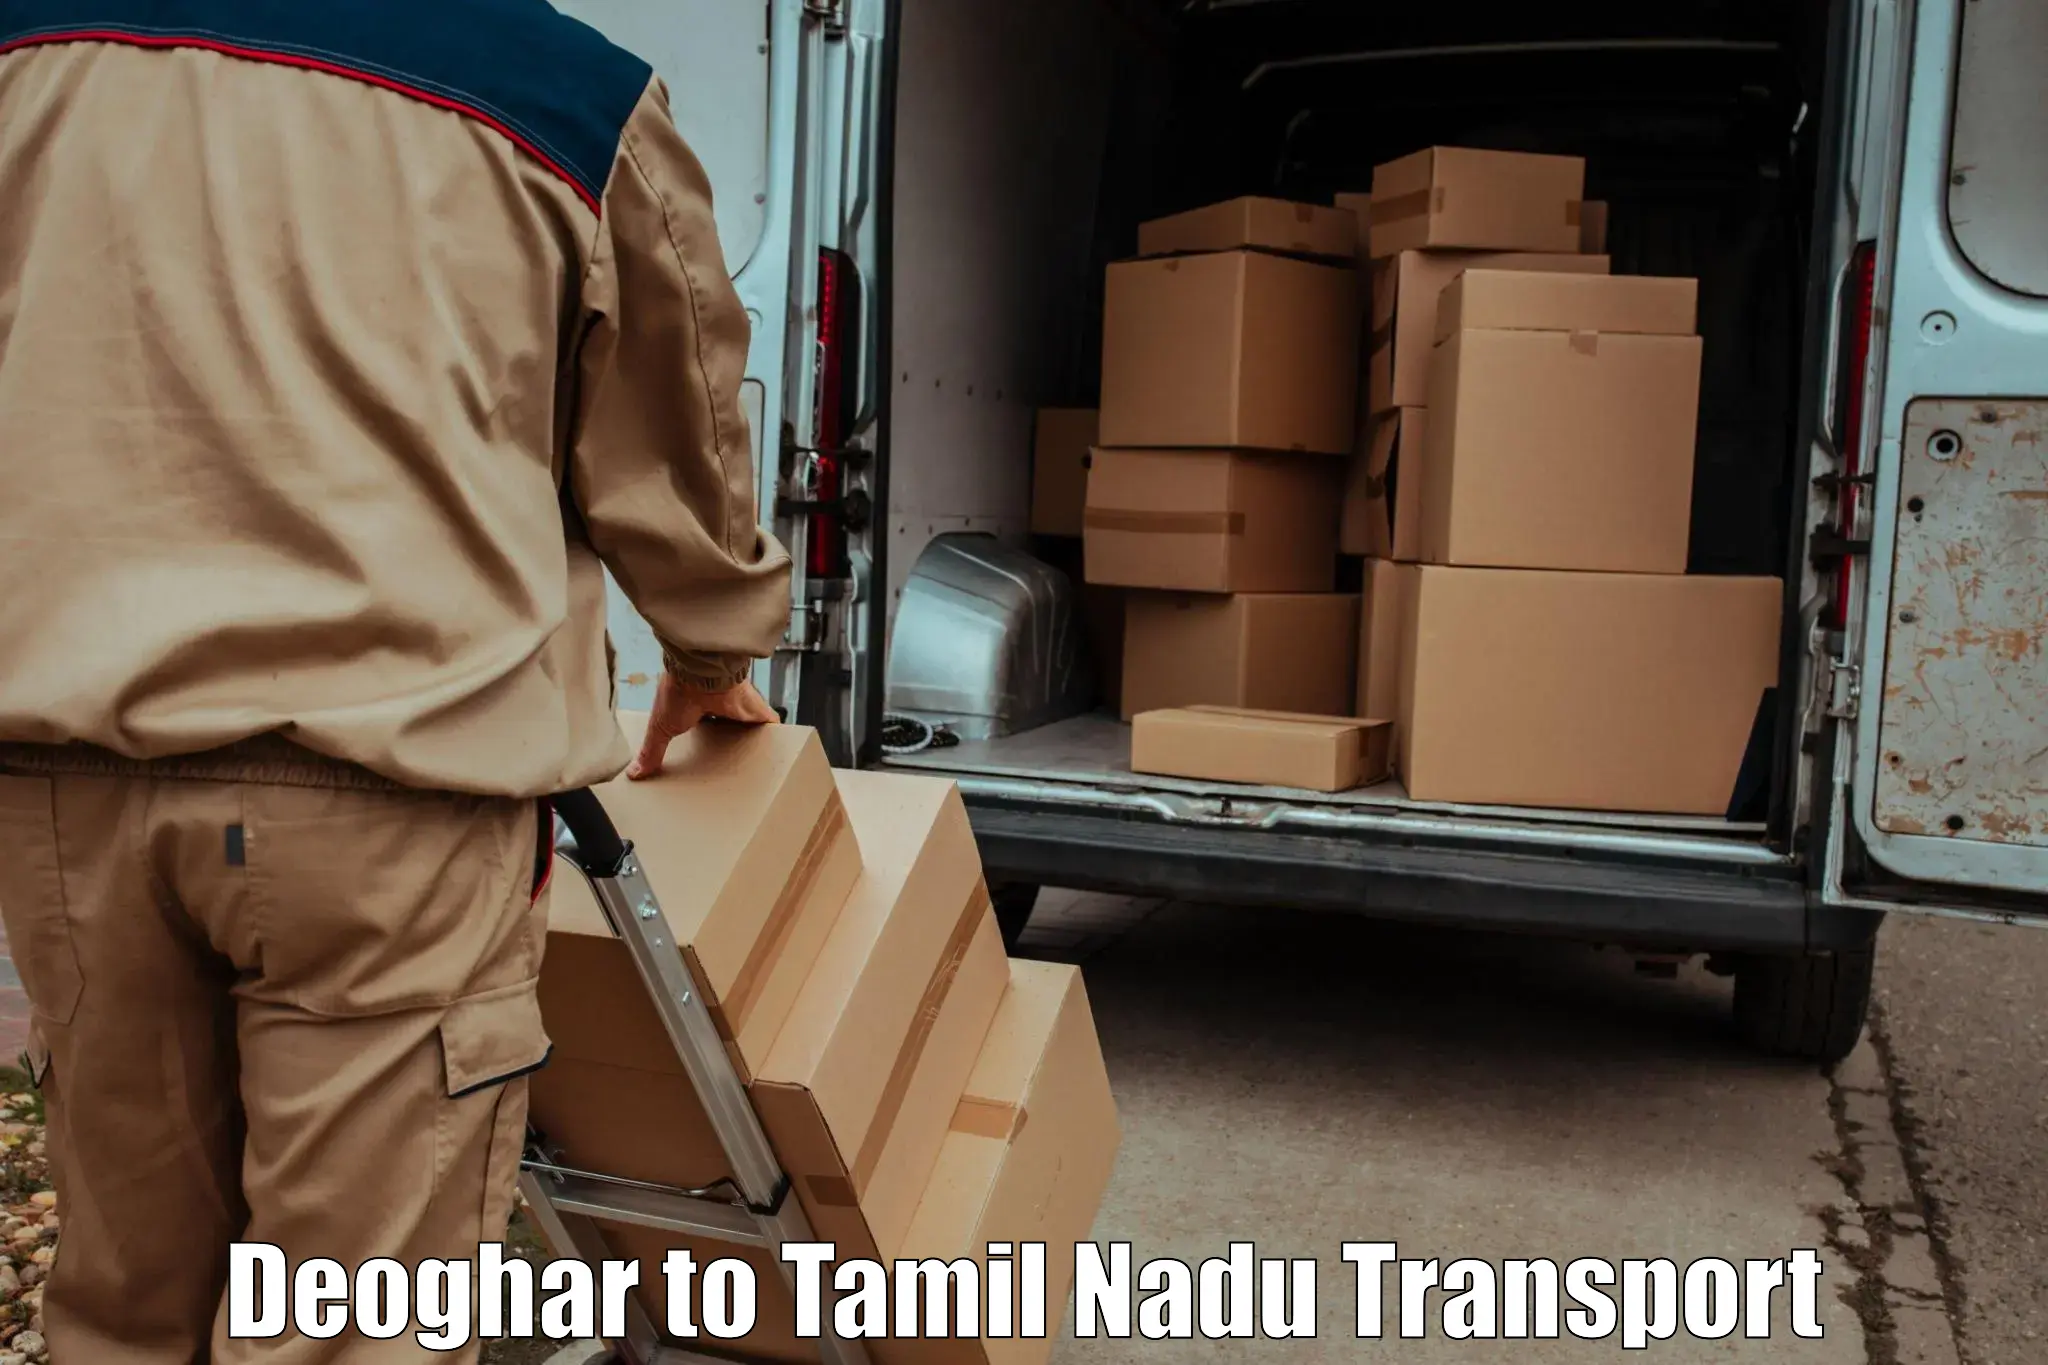 Delivery service Deoghar to Coimbatore